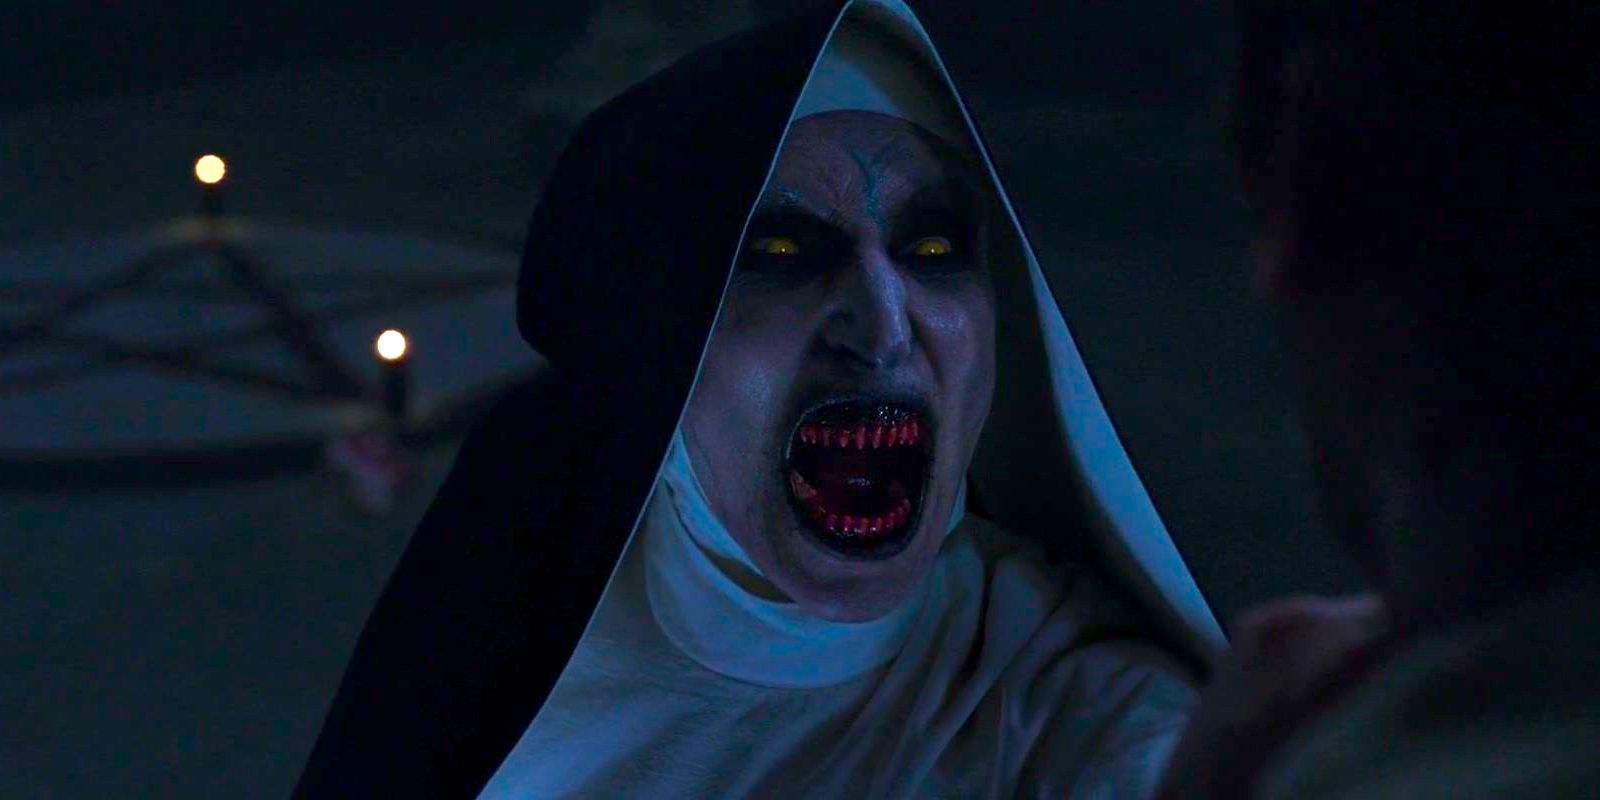 Bonnie Aarons as Valak in The Nun